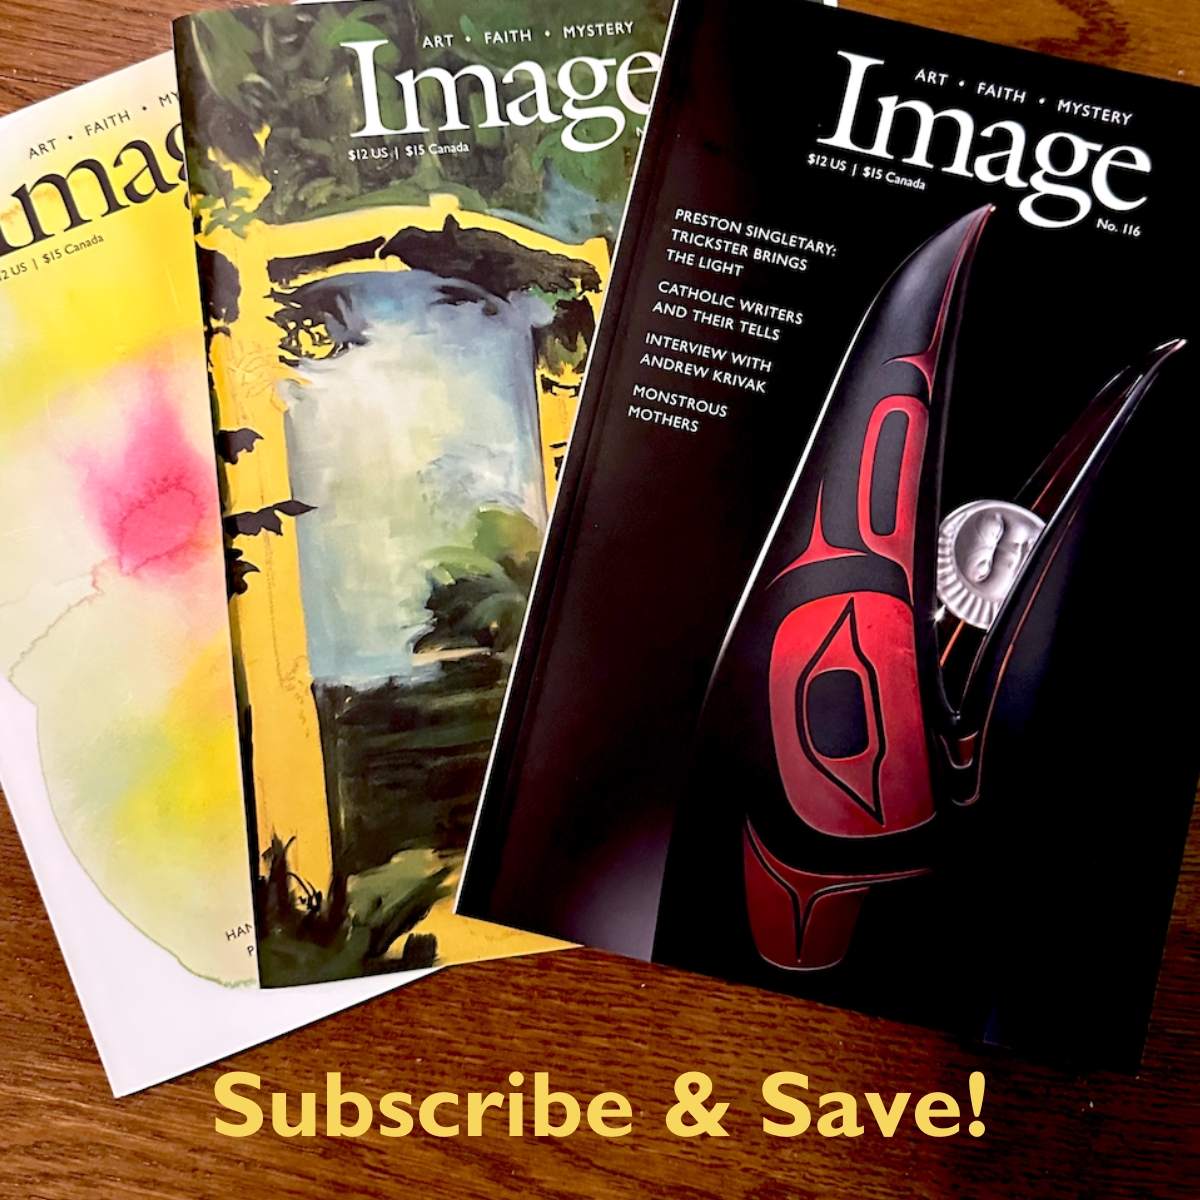 subscribe and save image of journal covers